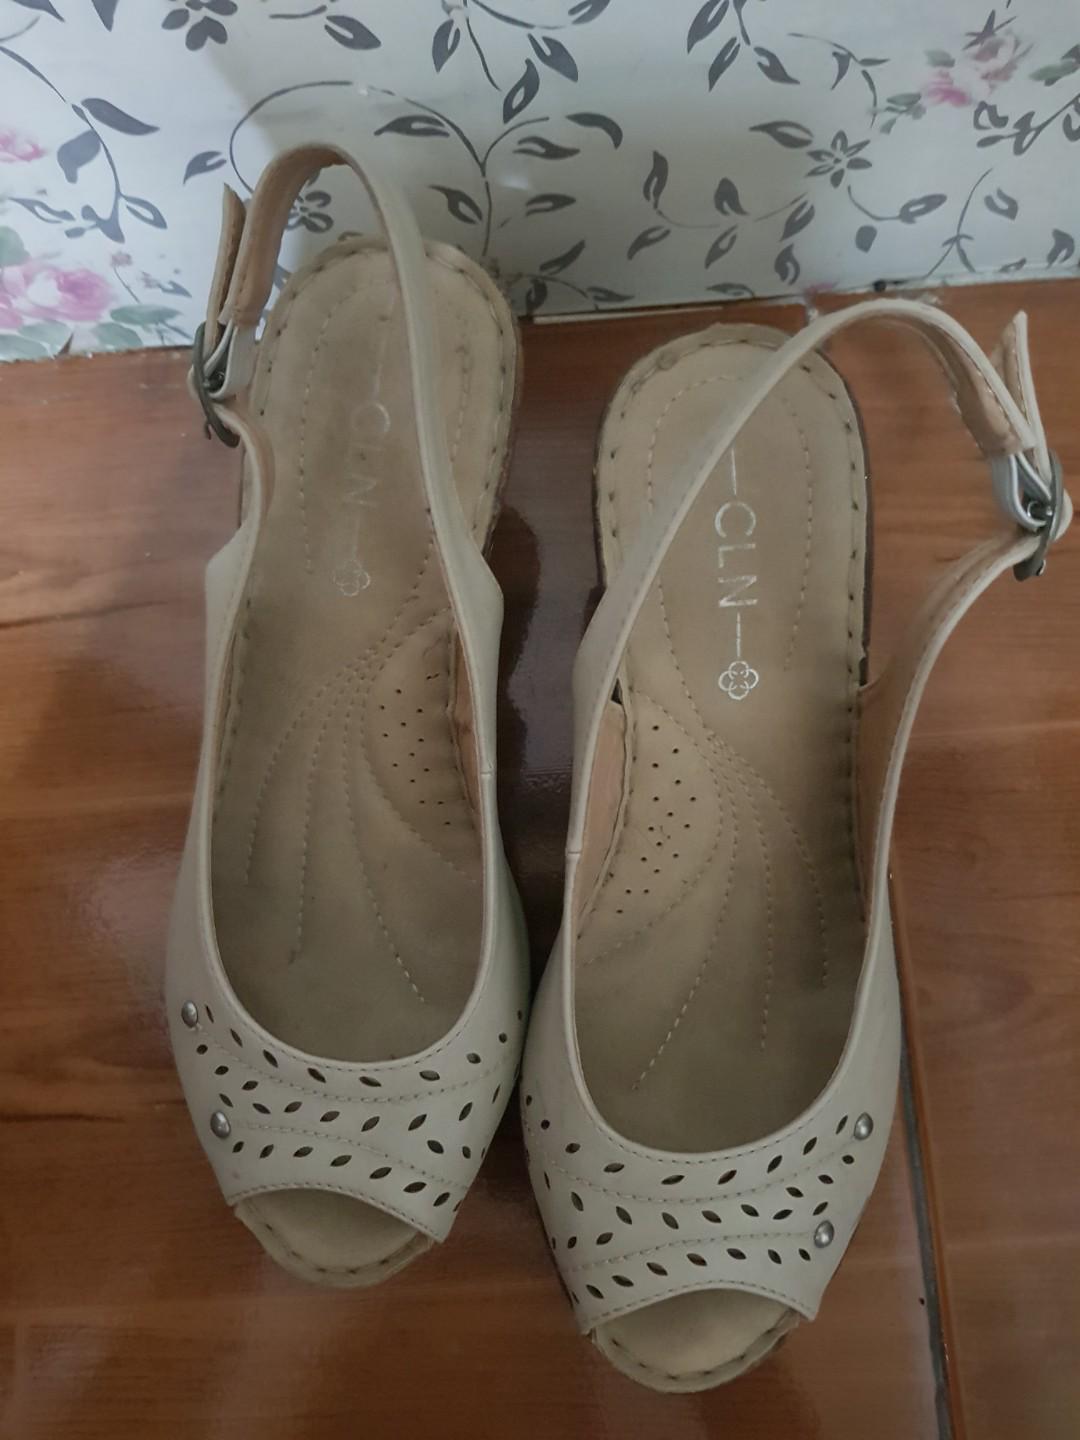 Assorted Celine Shoes for Sale, Women's 